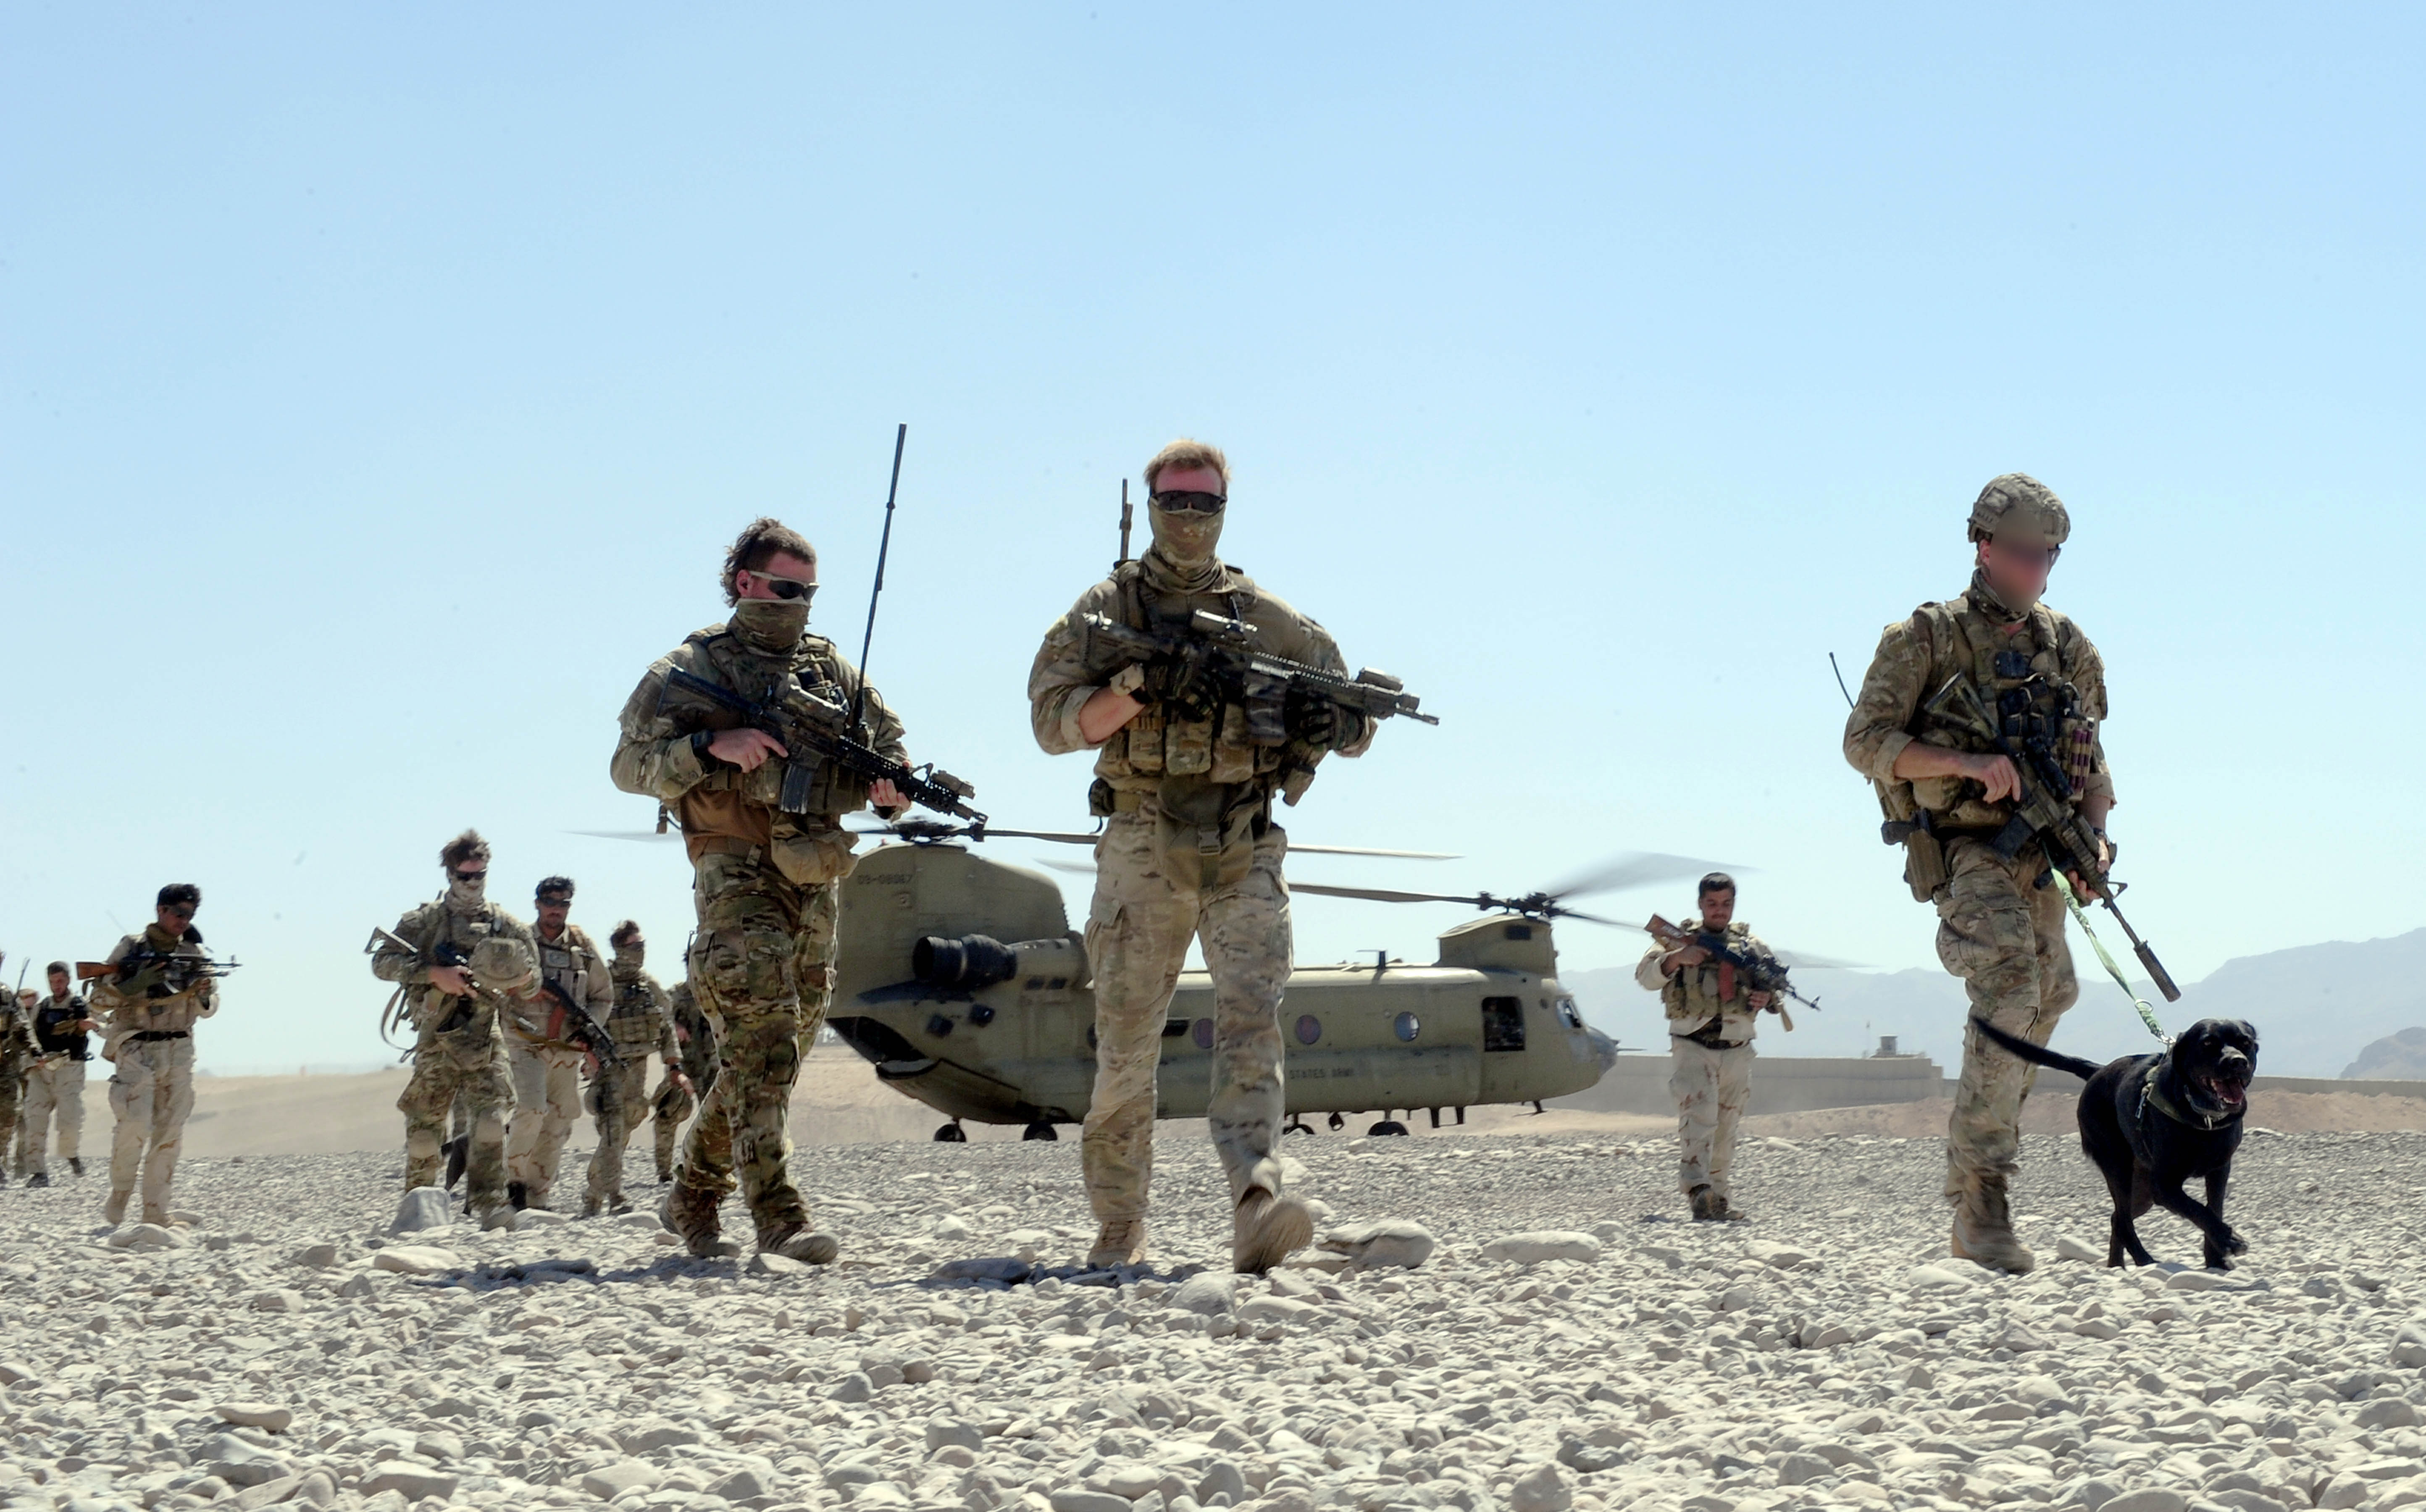 Special Operations Task Group soldiers and their partners from the Provincial Response Company - Uruzgan (PRC-U) arrive back at Multi National Base - Tarin Kot after conducting a PRC-U led security operation in Uruzgan Province, Southern Afghanistan.